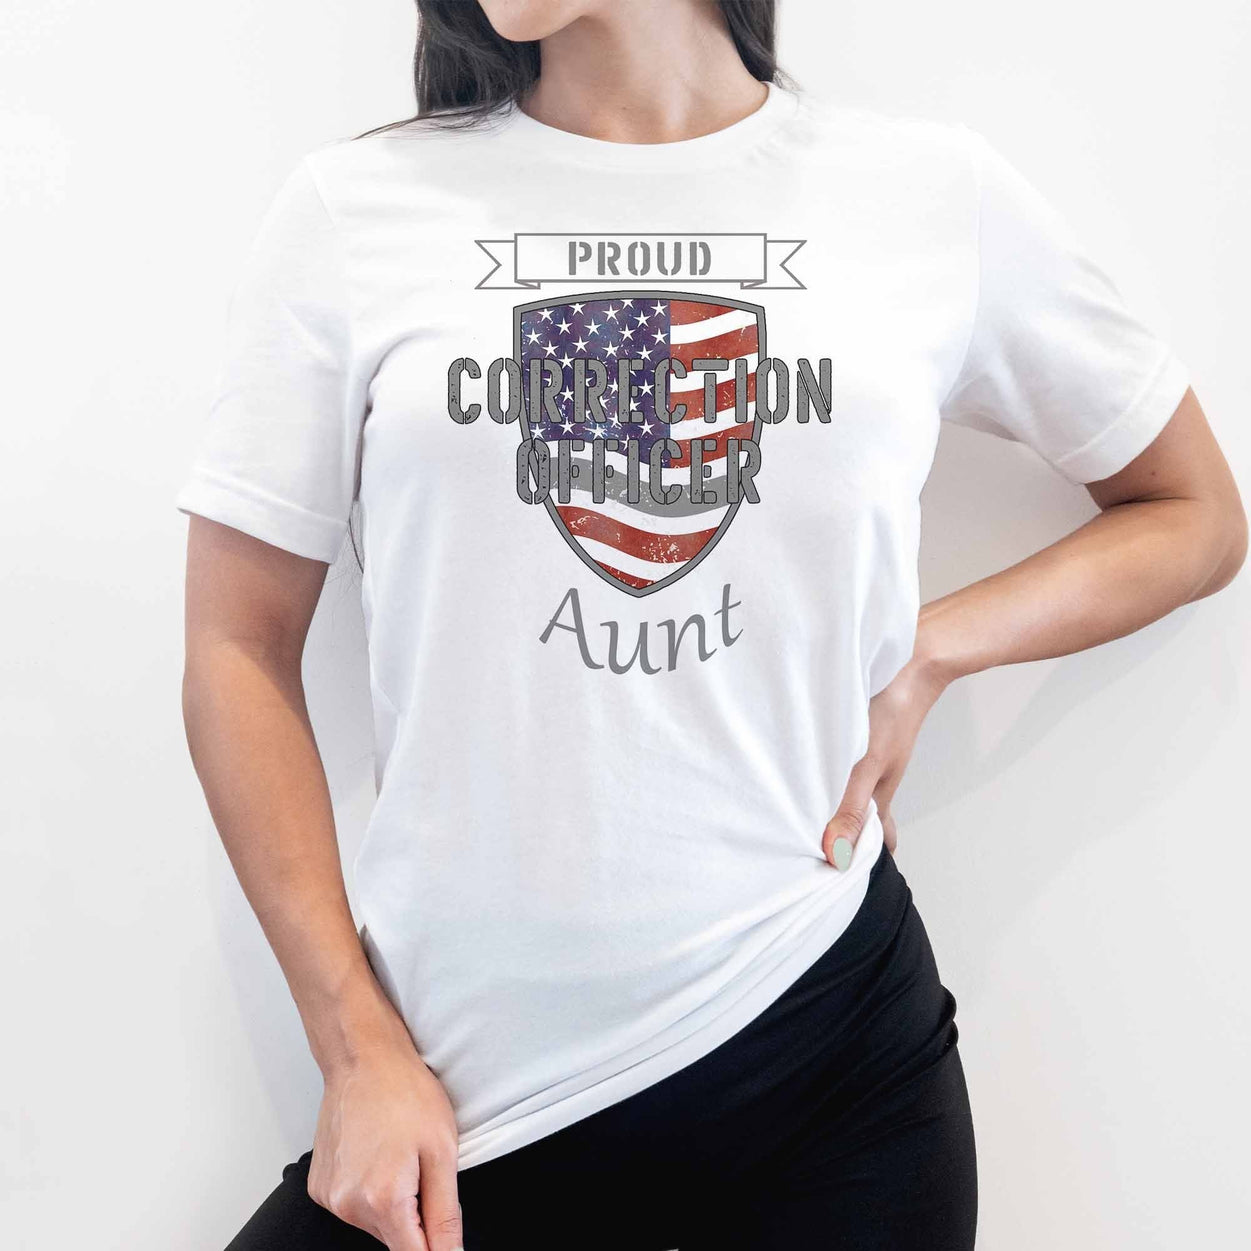 Proud Correction Officer Aunt - My Custom Tee Party